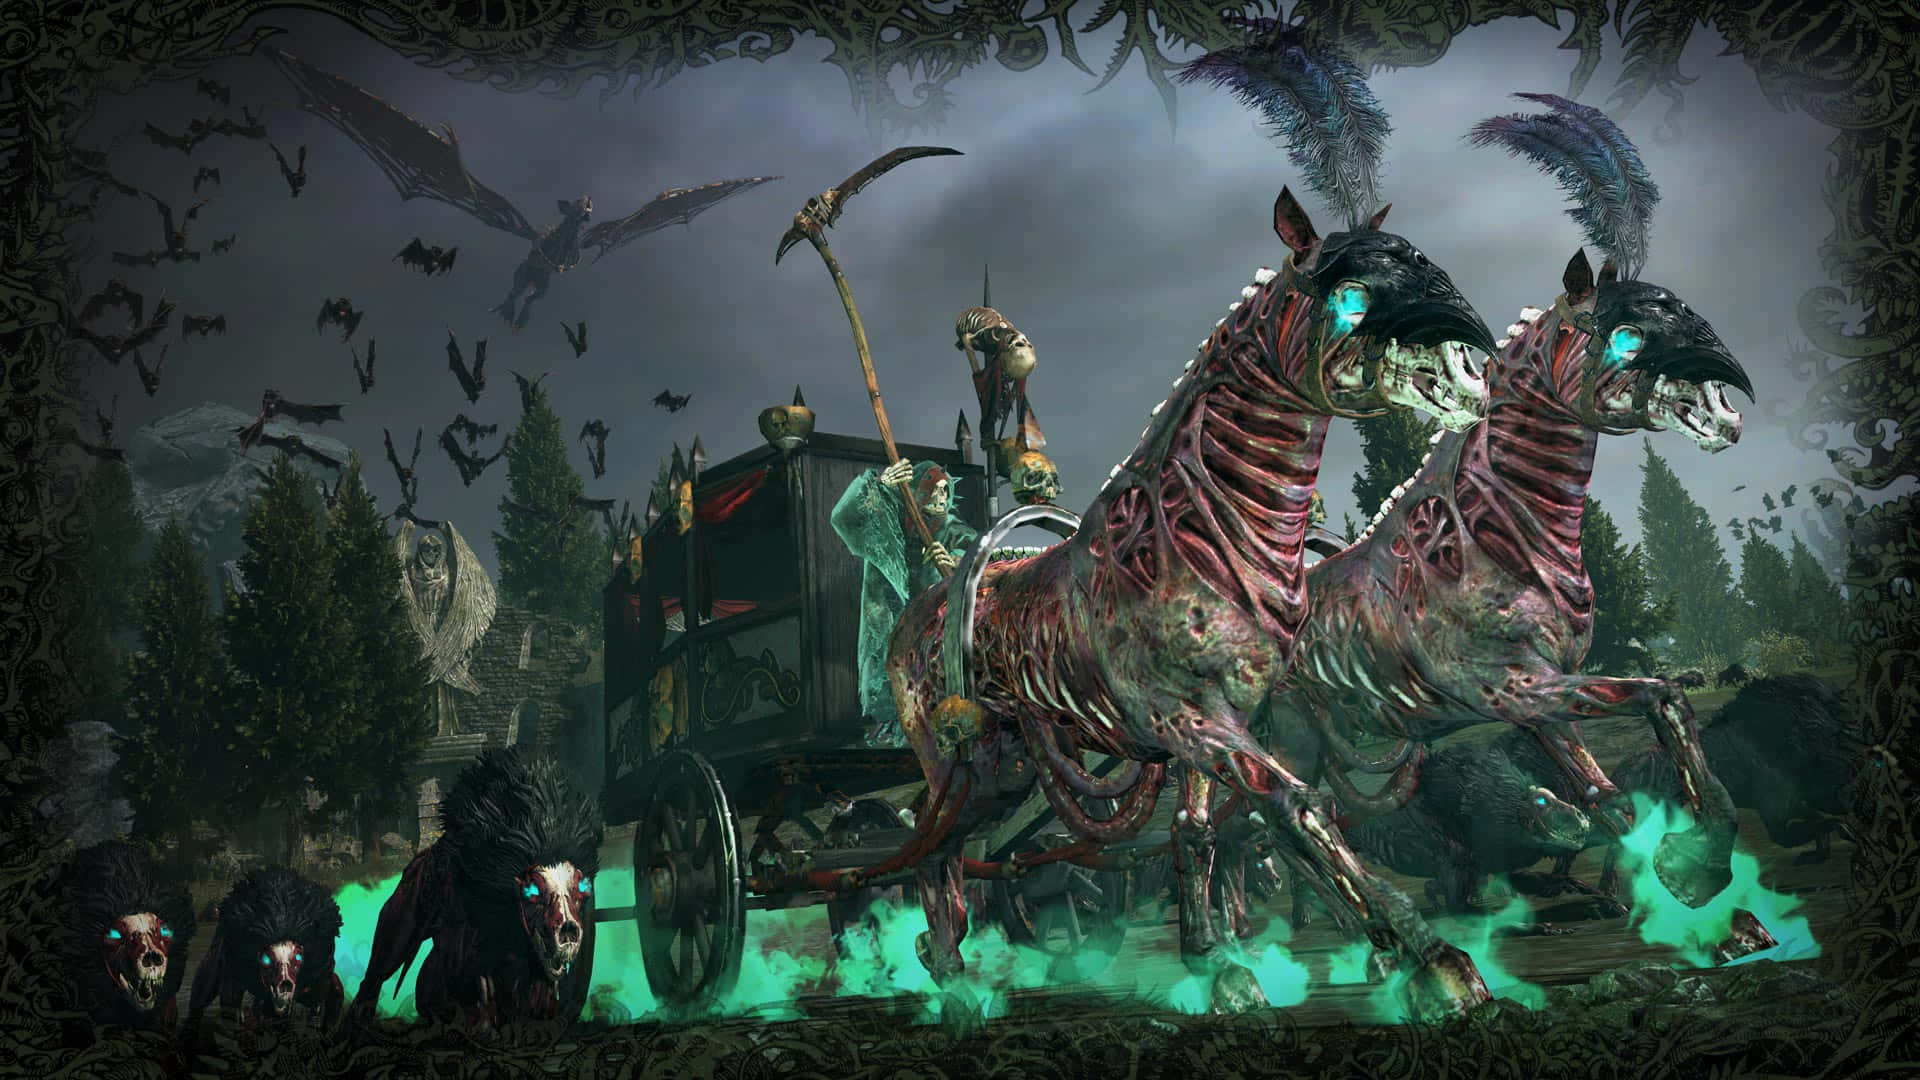 A Horse Drawn Carriage With A Green Dragon And A Demon